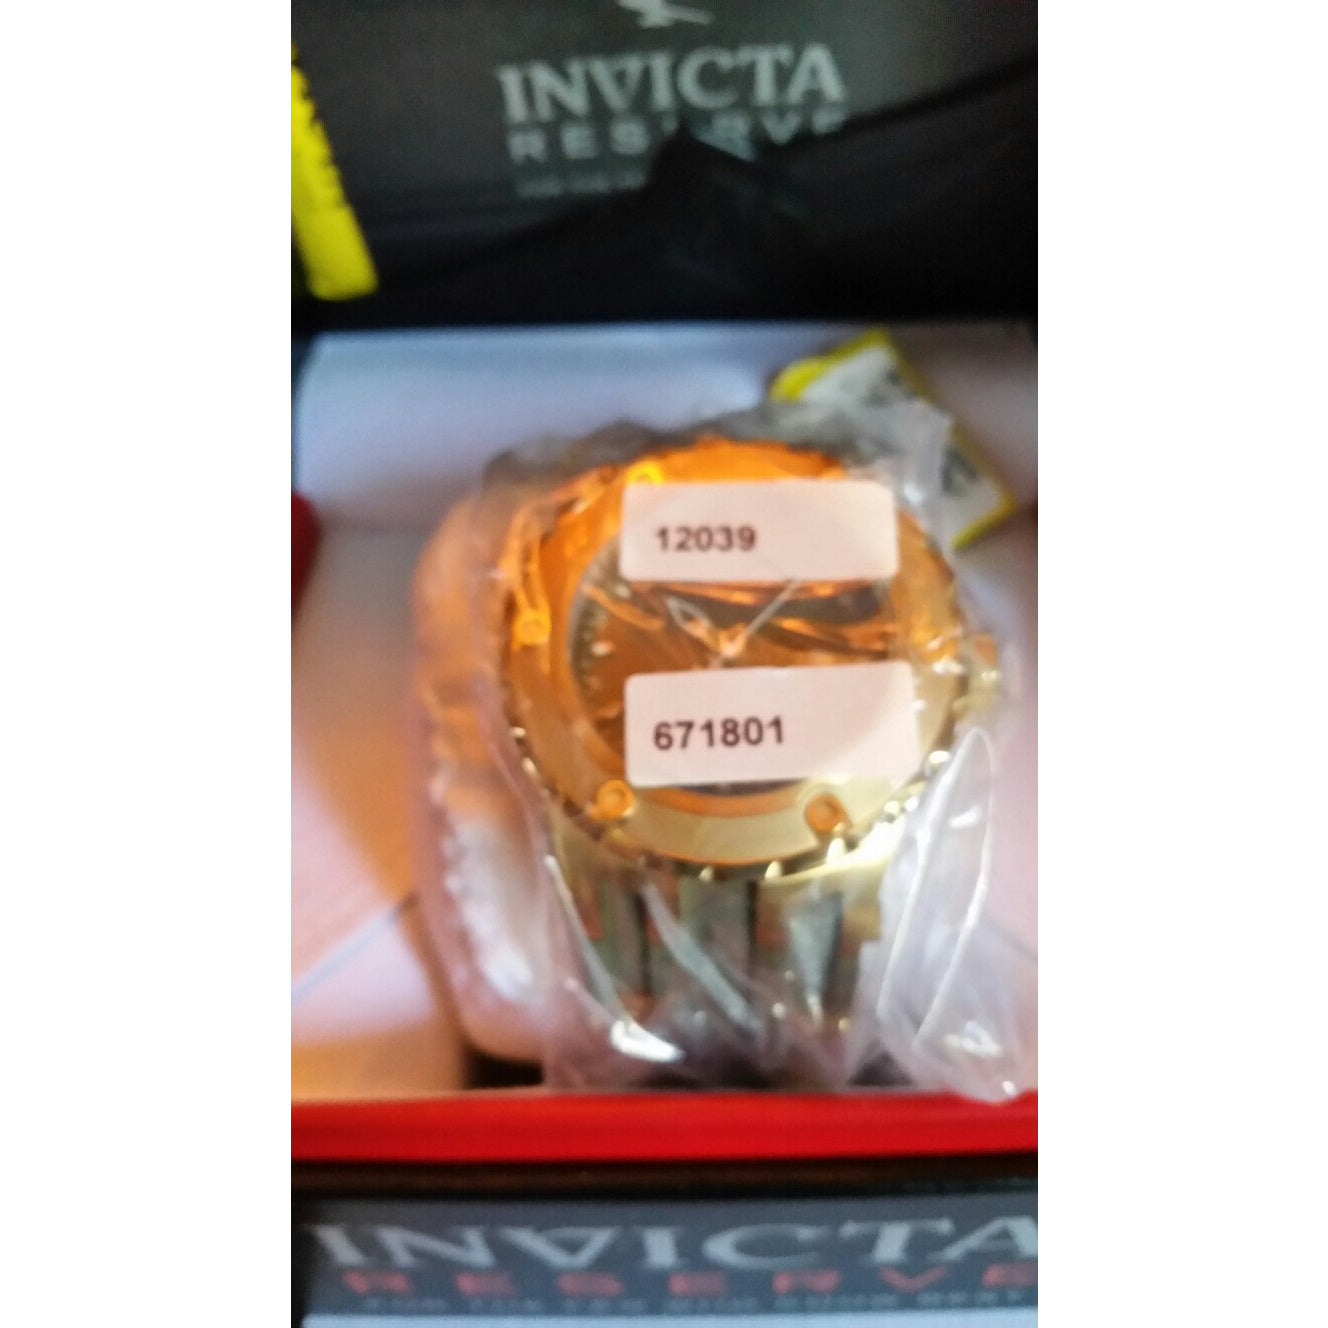 Invicta 12039 New In The Box Olive Band Gold Case With Black Face